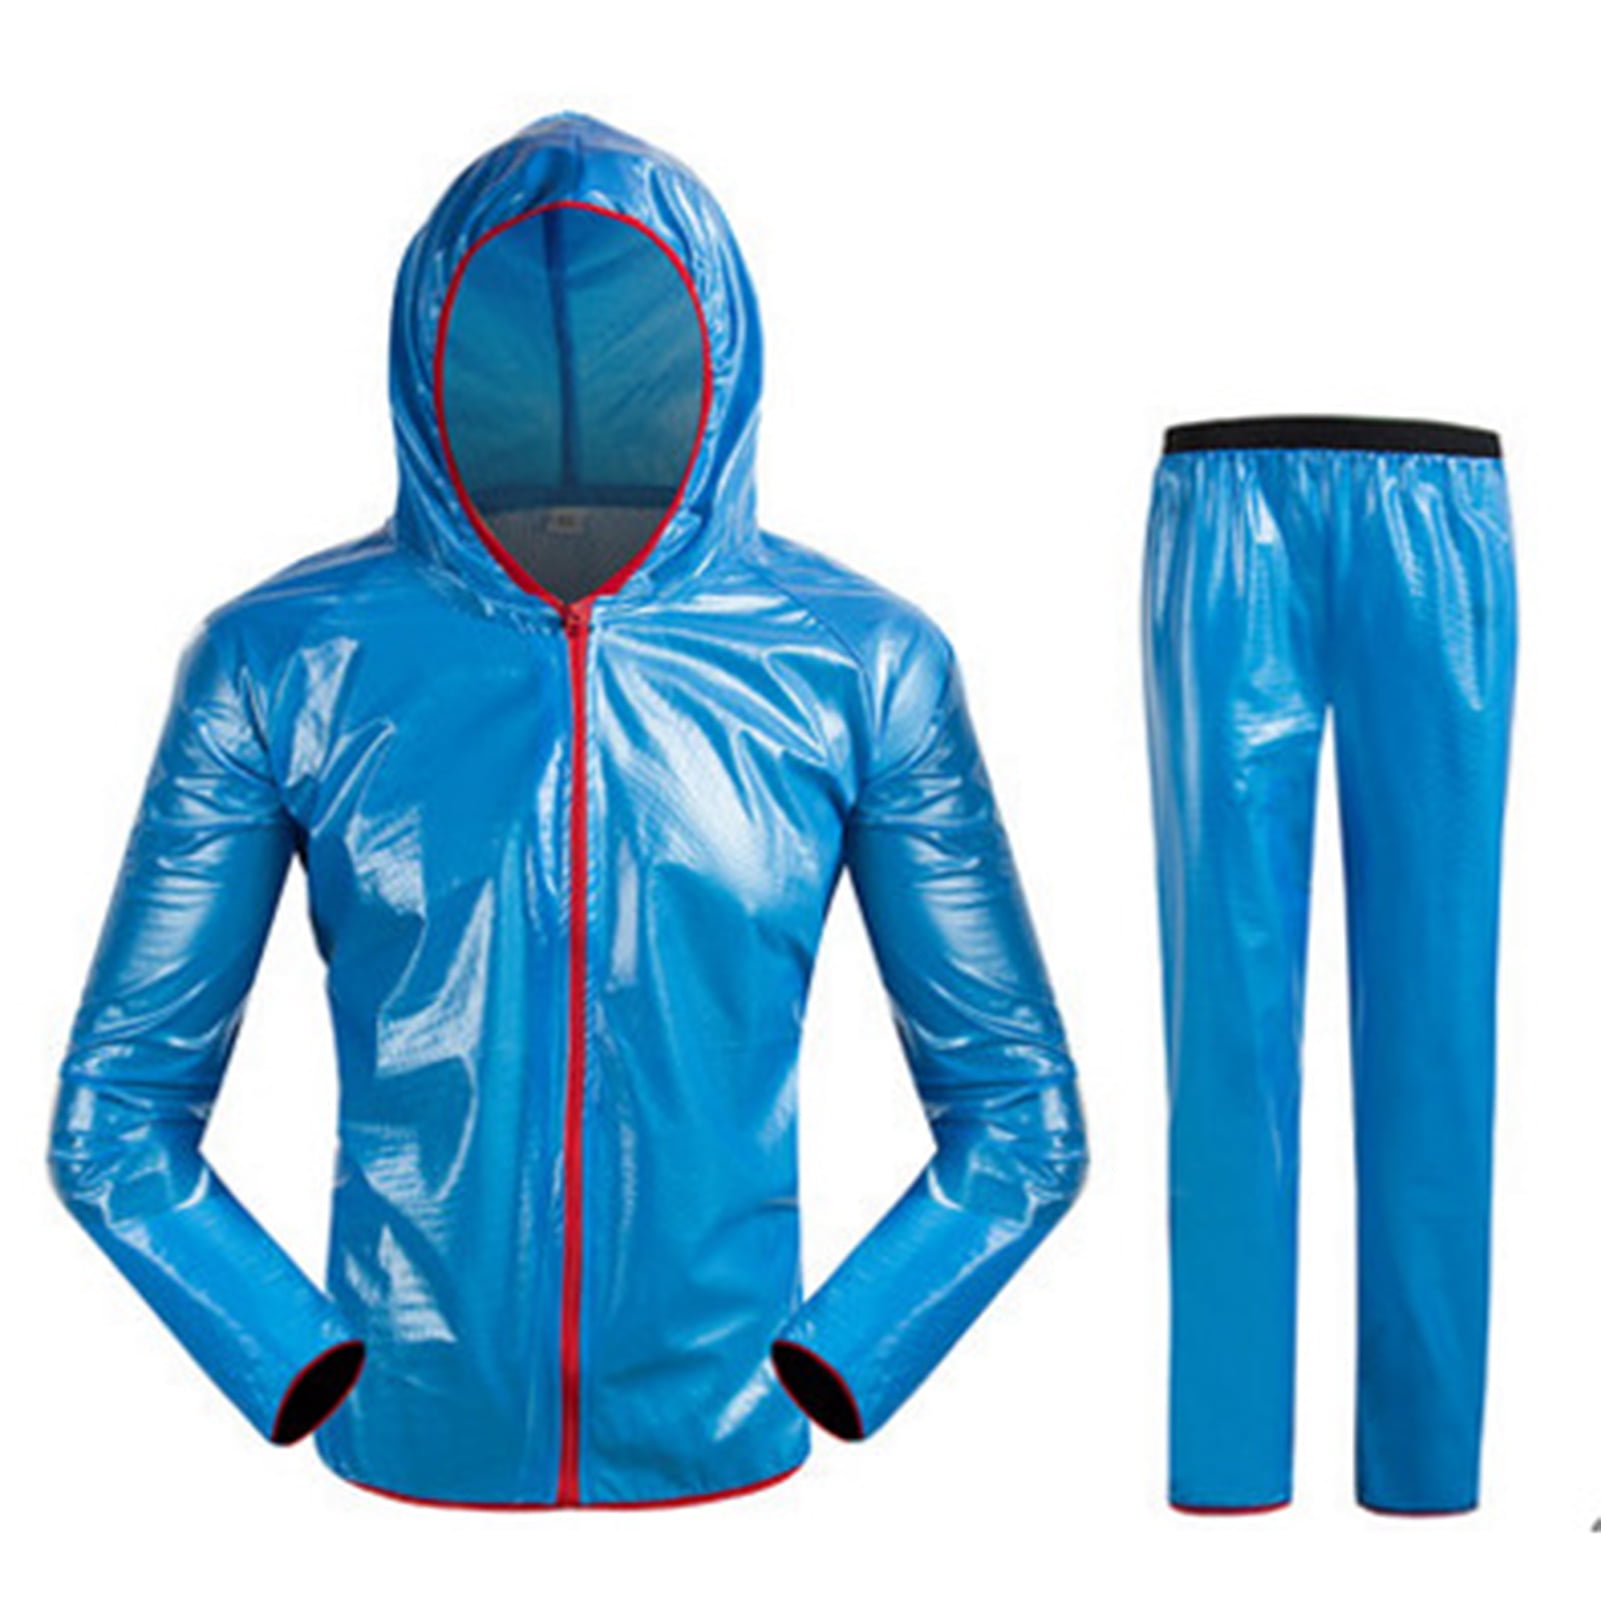 Details about   Men Jacket Thermal Windproof Cycling Mtb Bike Bicycle Waterproof Sport Clothing 